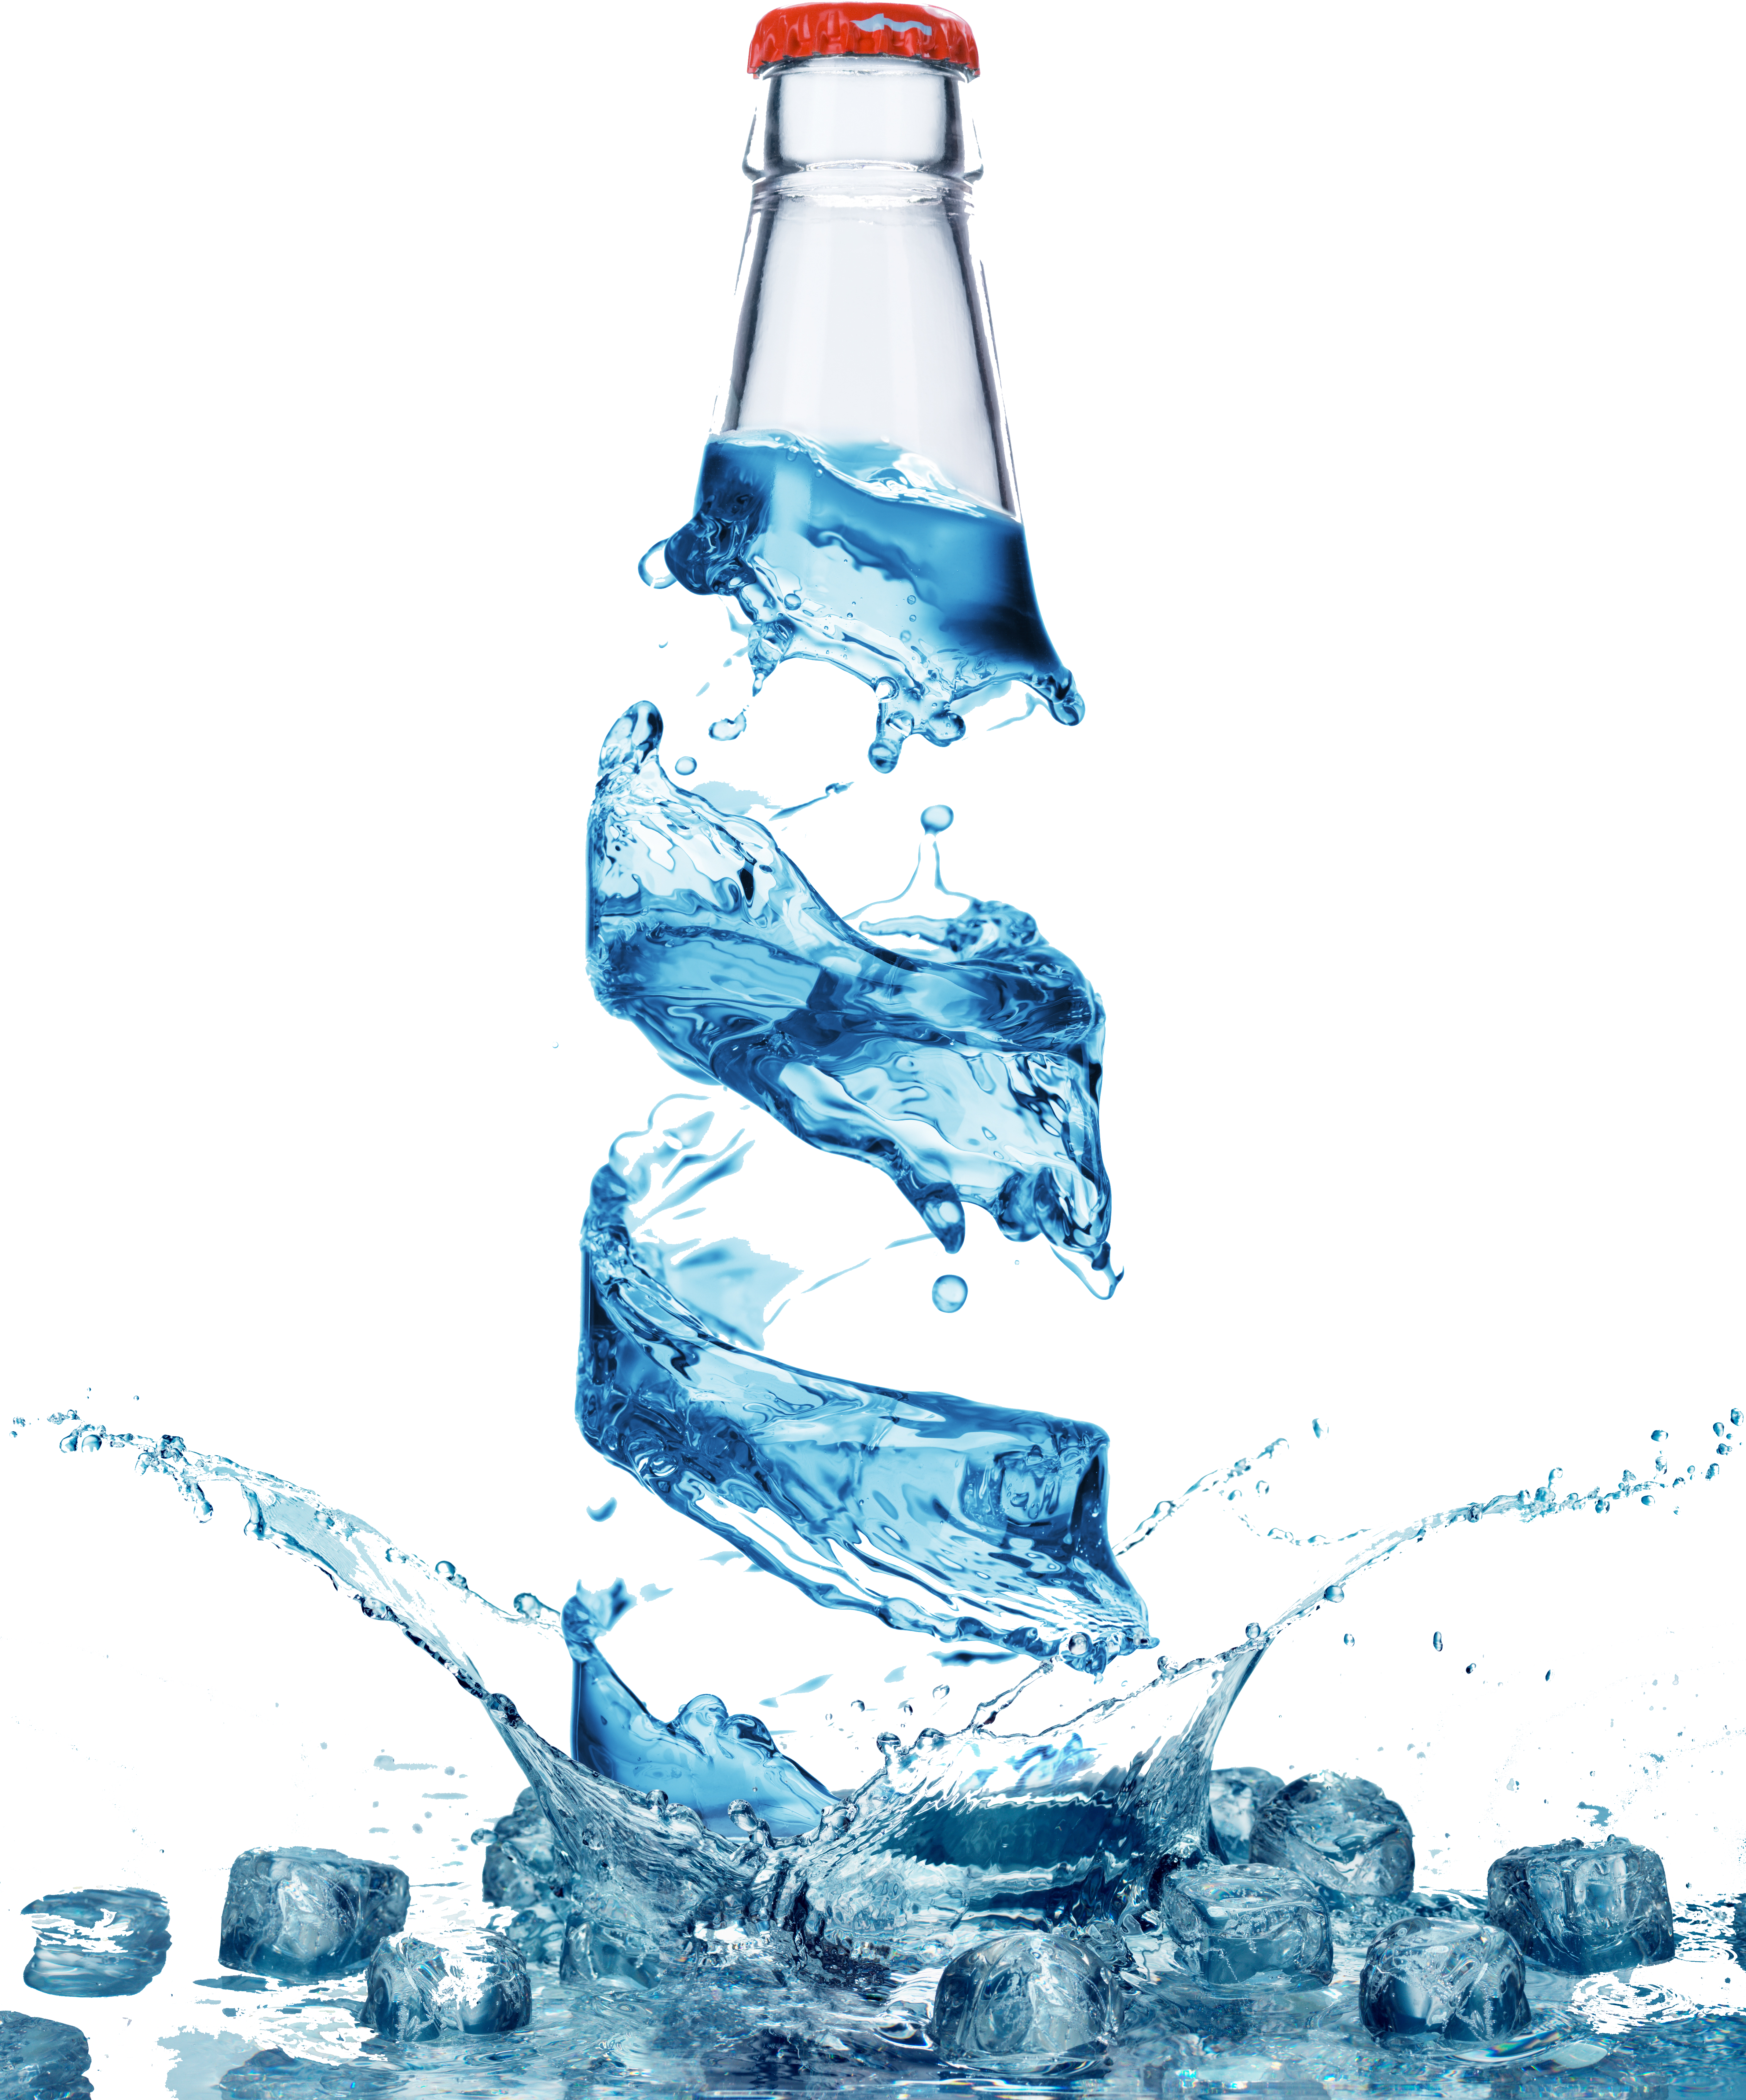 Water Purified Bottled Mineral Bottle Free HQ Image Clipart